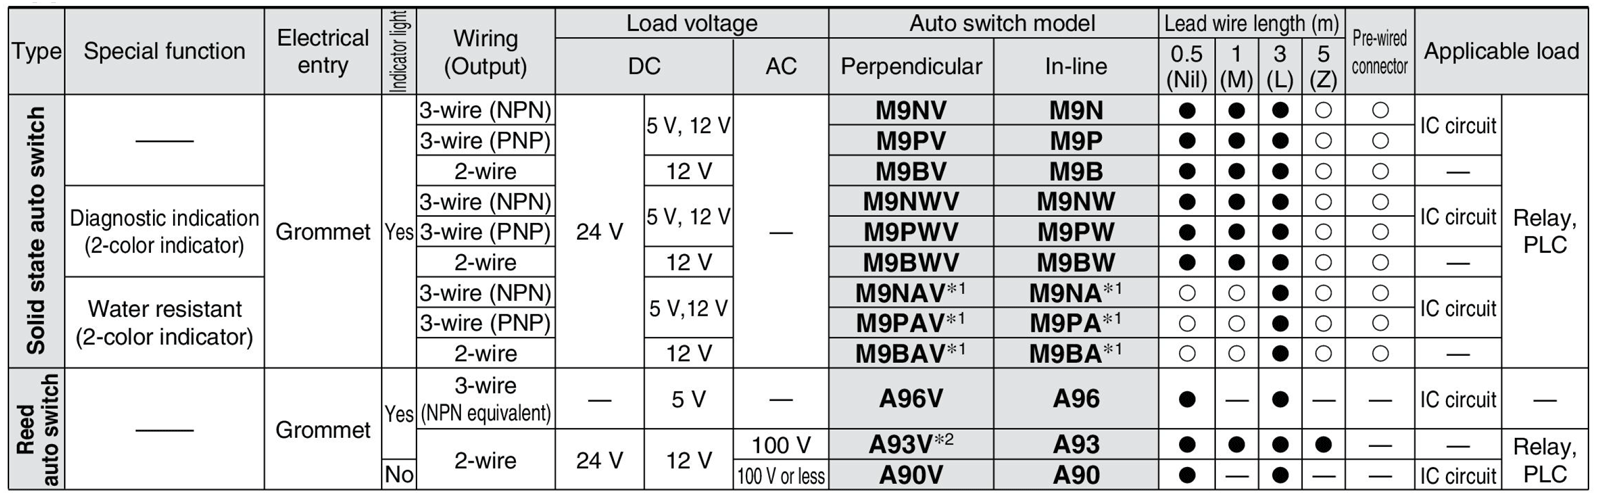 Applicable auto switch part number identification, reference